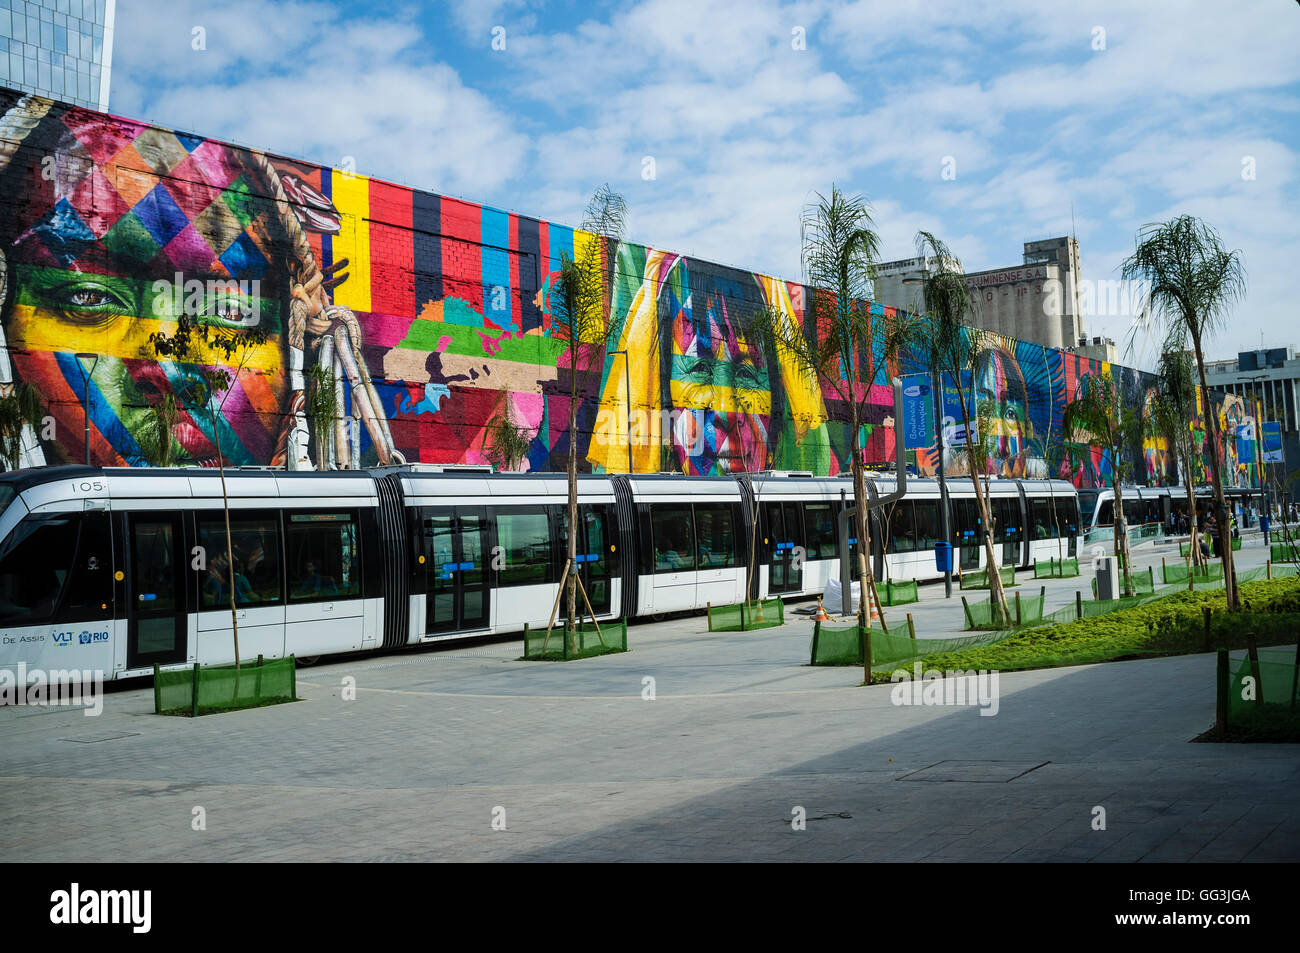 Rio de Janeiro Light Rail ( Portuguese - VLT do Rio de Janeiro or VLT Carioca ), a light rail system opened in June 2016 ahead of the 2016 Olympic Games passes in front of Eduardo Kobra s Mural named Native people from the 5 continents ( Povos nativos dos 5 continentes ) at Boulevard do Porto in Rio de Janeiro port surrounding area, Brazil, part of the Porto Maravilha Project ( Marvelous Port Program ), a revitalization project of the city Port Zone. Kobra is a Brazilian street artist notable for painting large murals, usually depicting portraits with a technique of repeating squares and trian Stock Photo